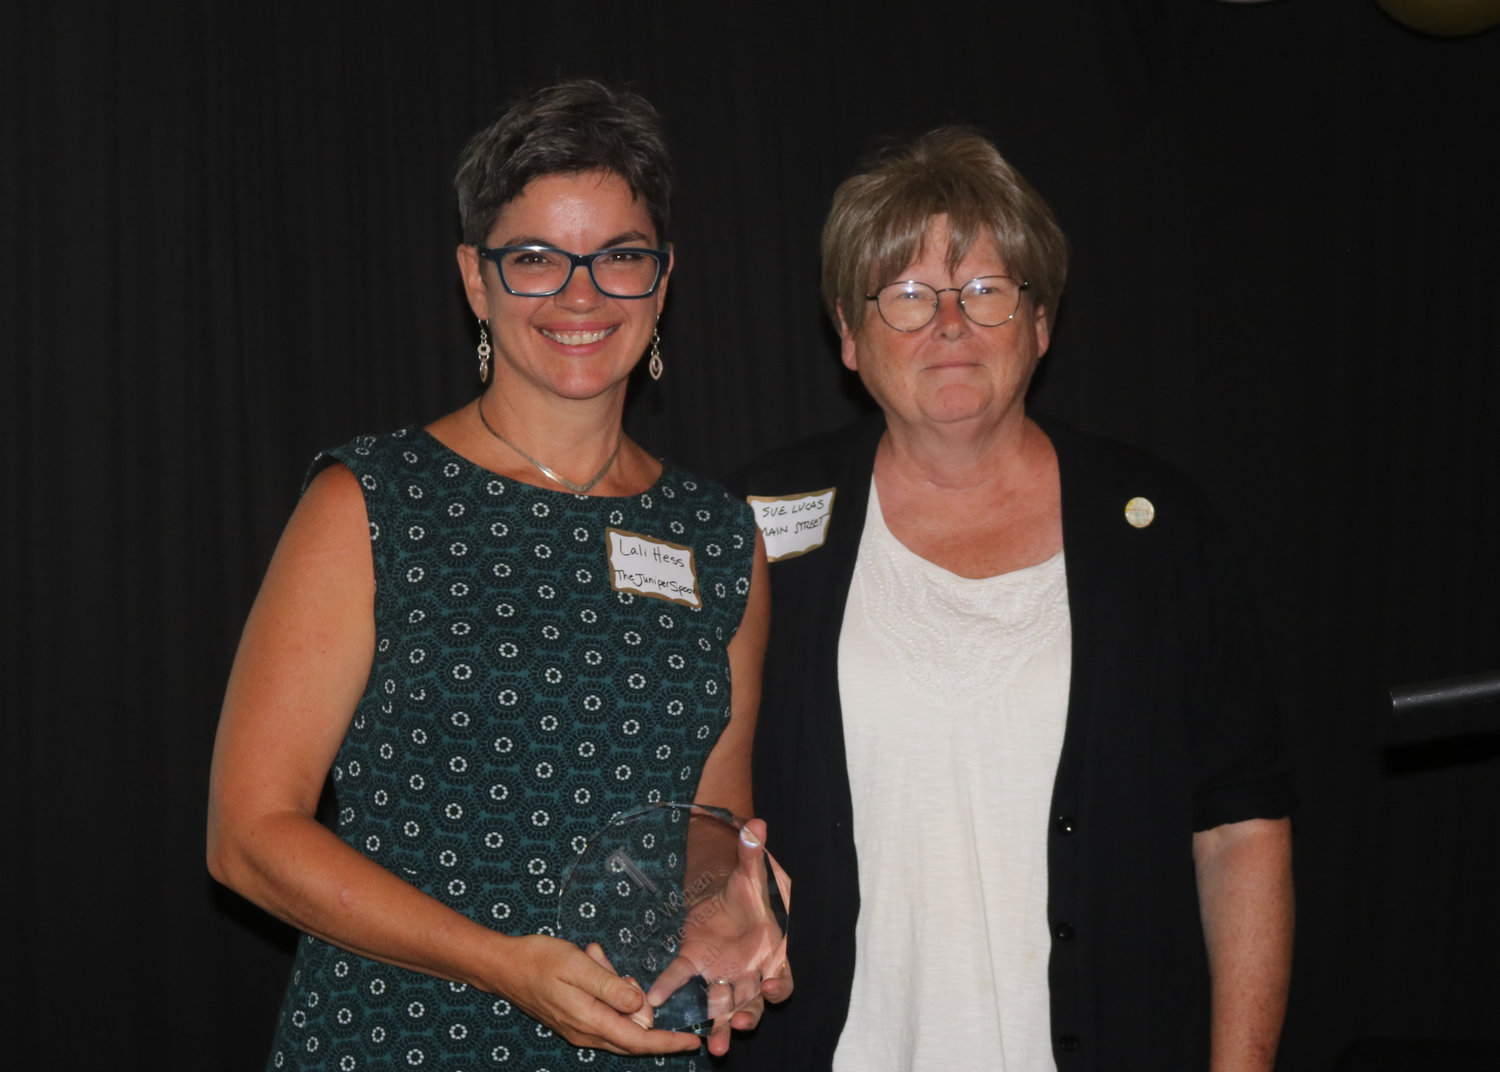 Lali Hess, left, of Juniper Spoon, was named Woman of the Year. She is pictured with Sue Lucas.